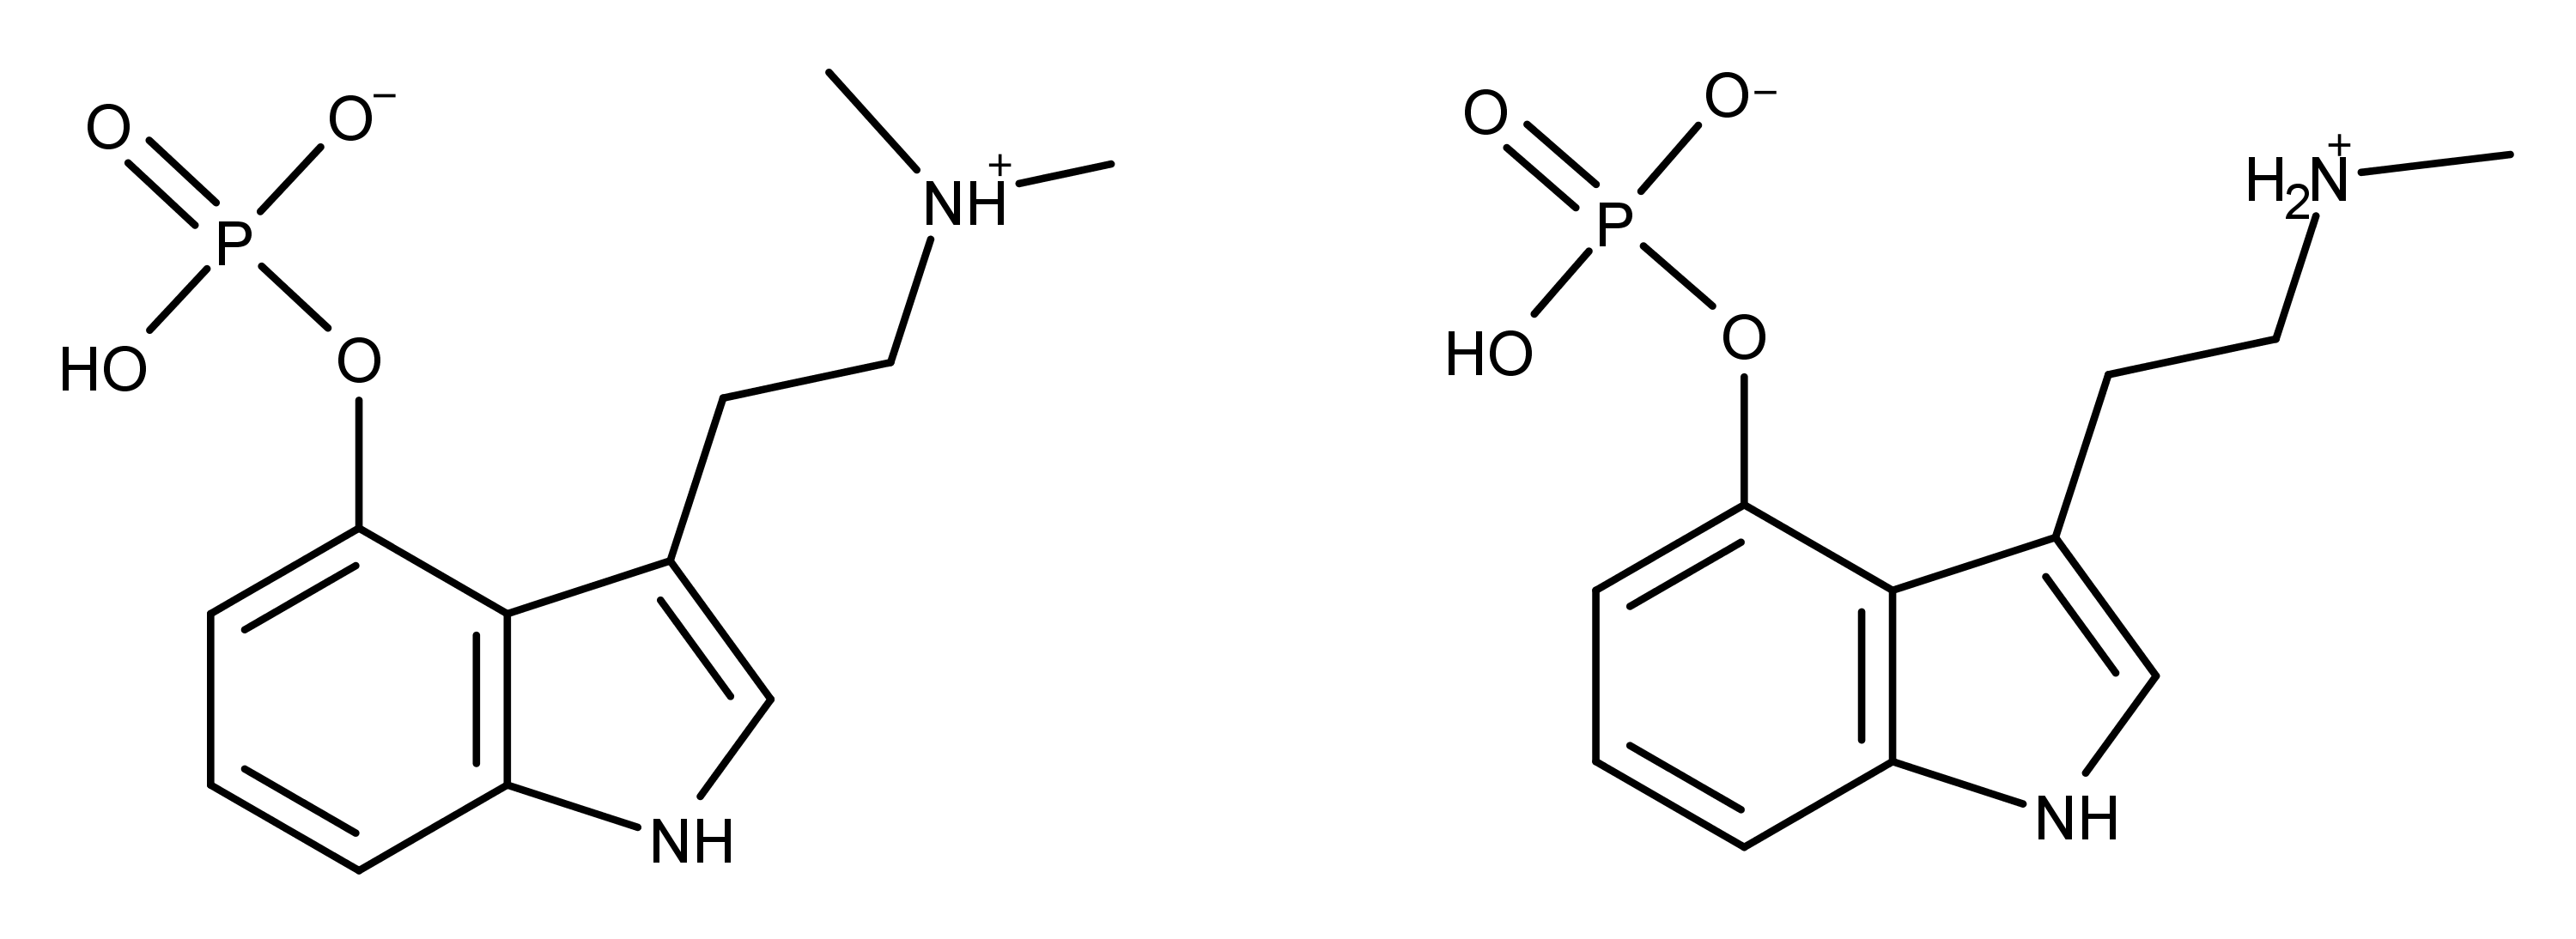 The chemical structures of psilocybin and baeocystin.